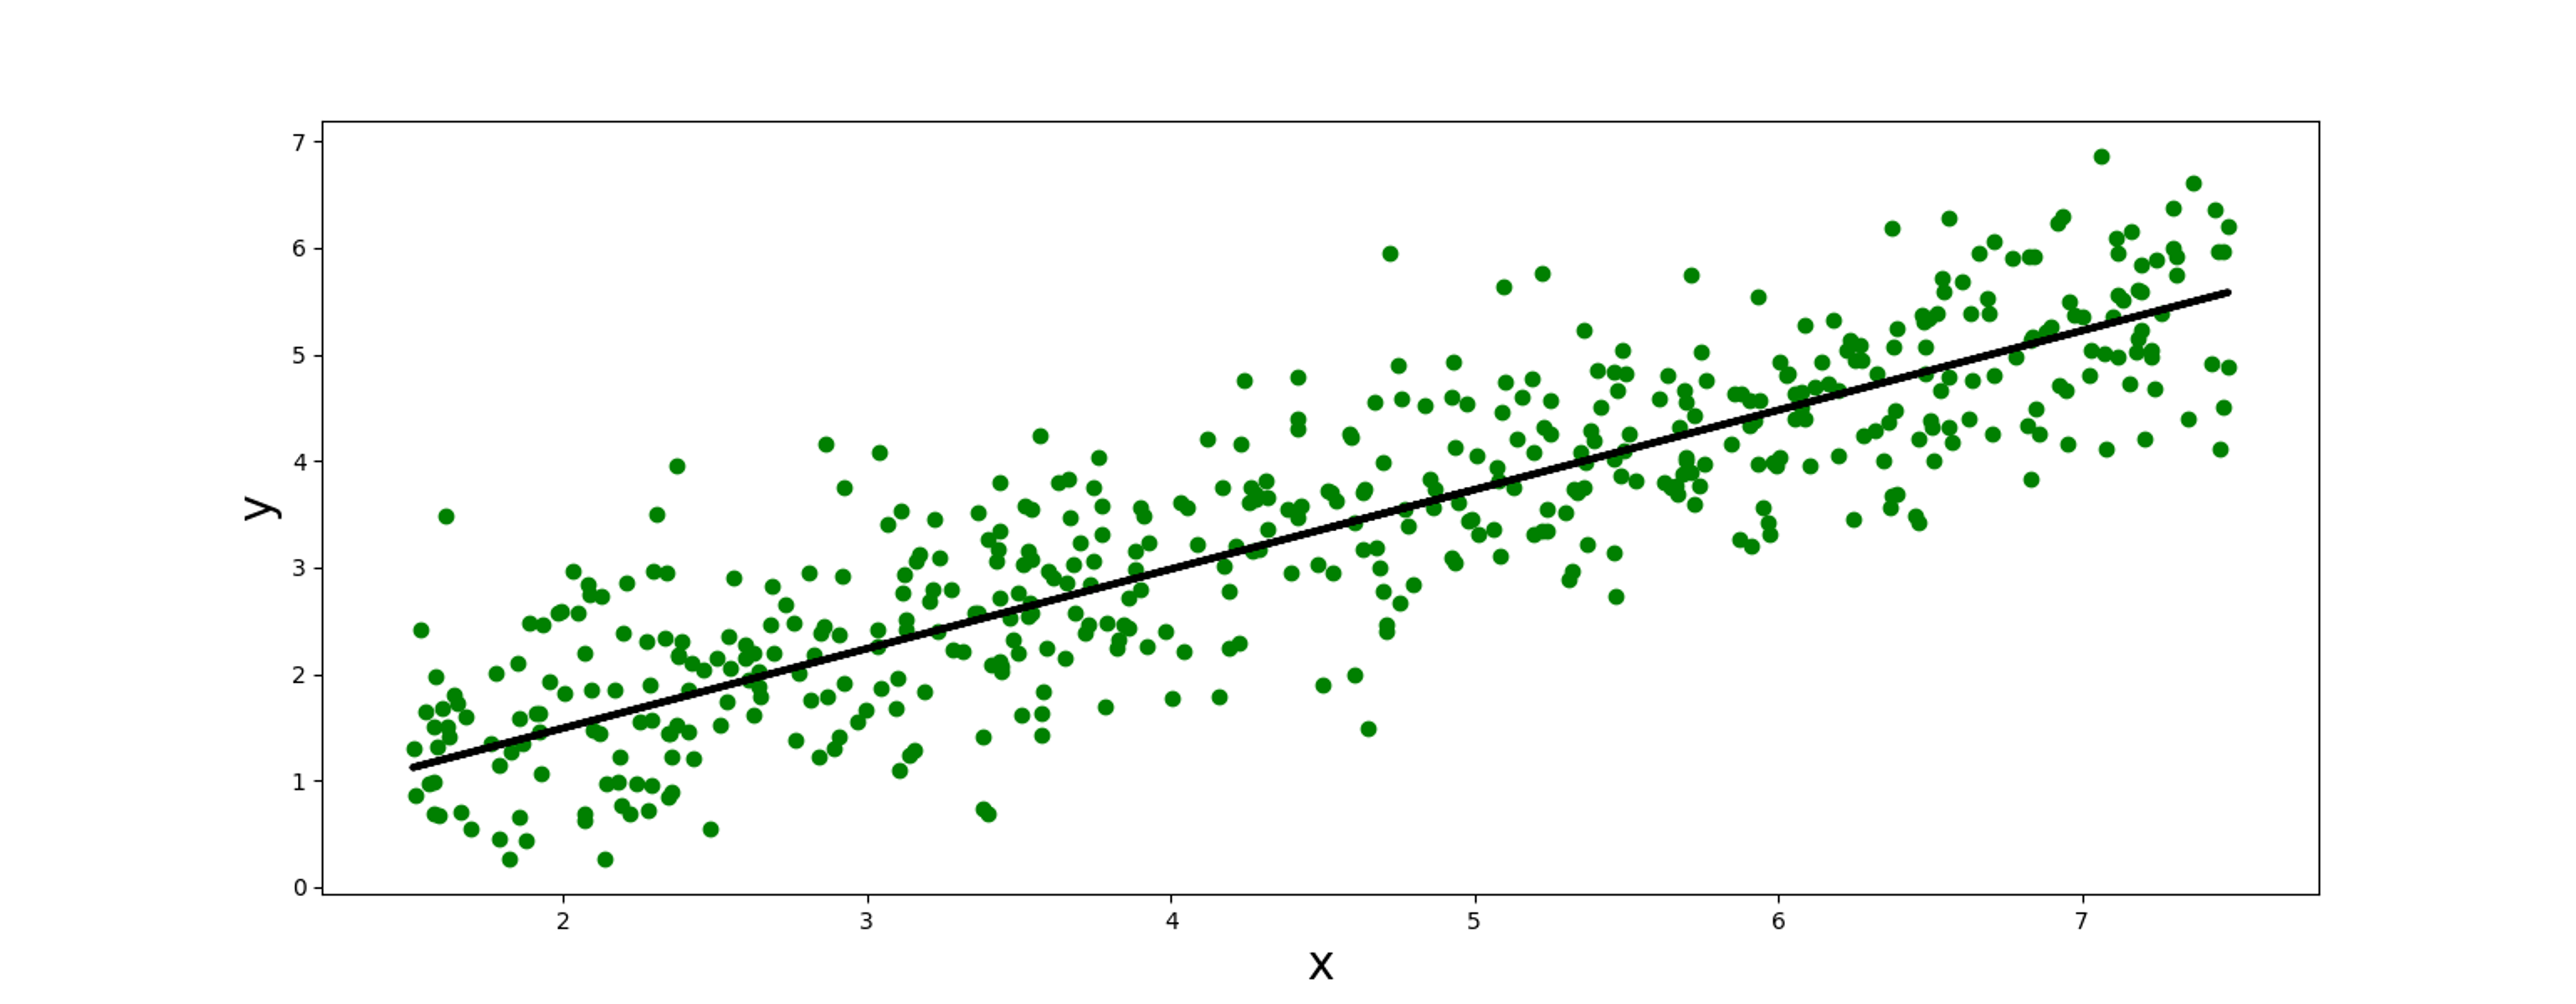 Linear regression in supervised learning